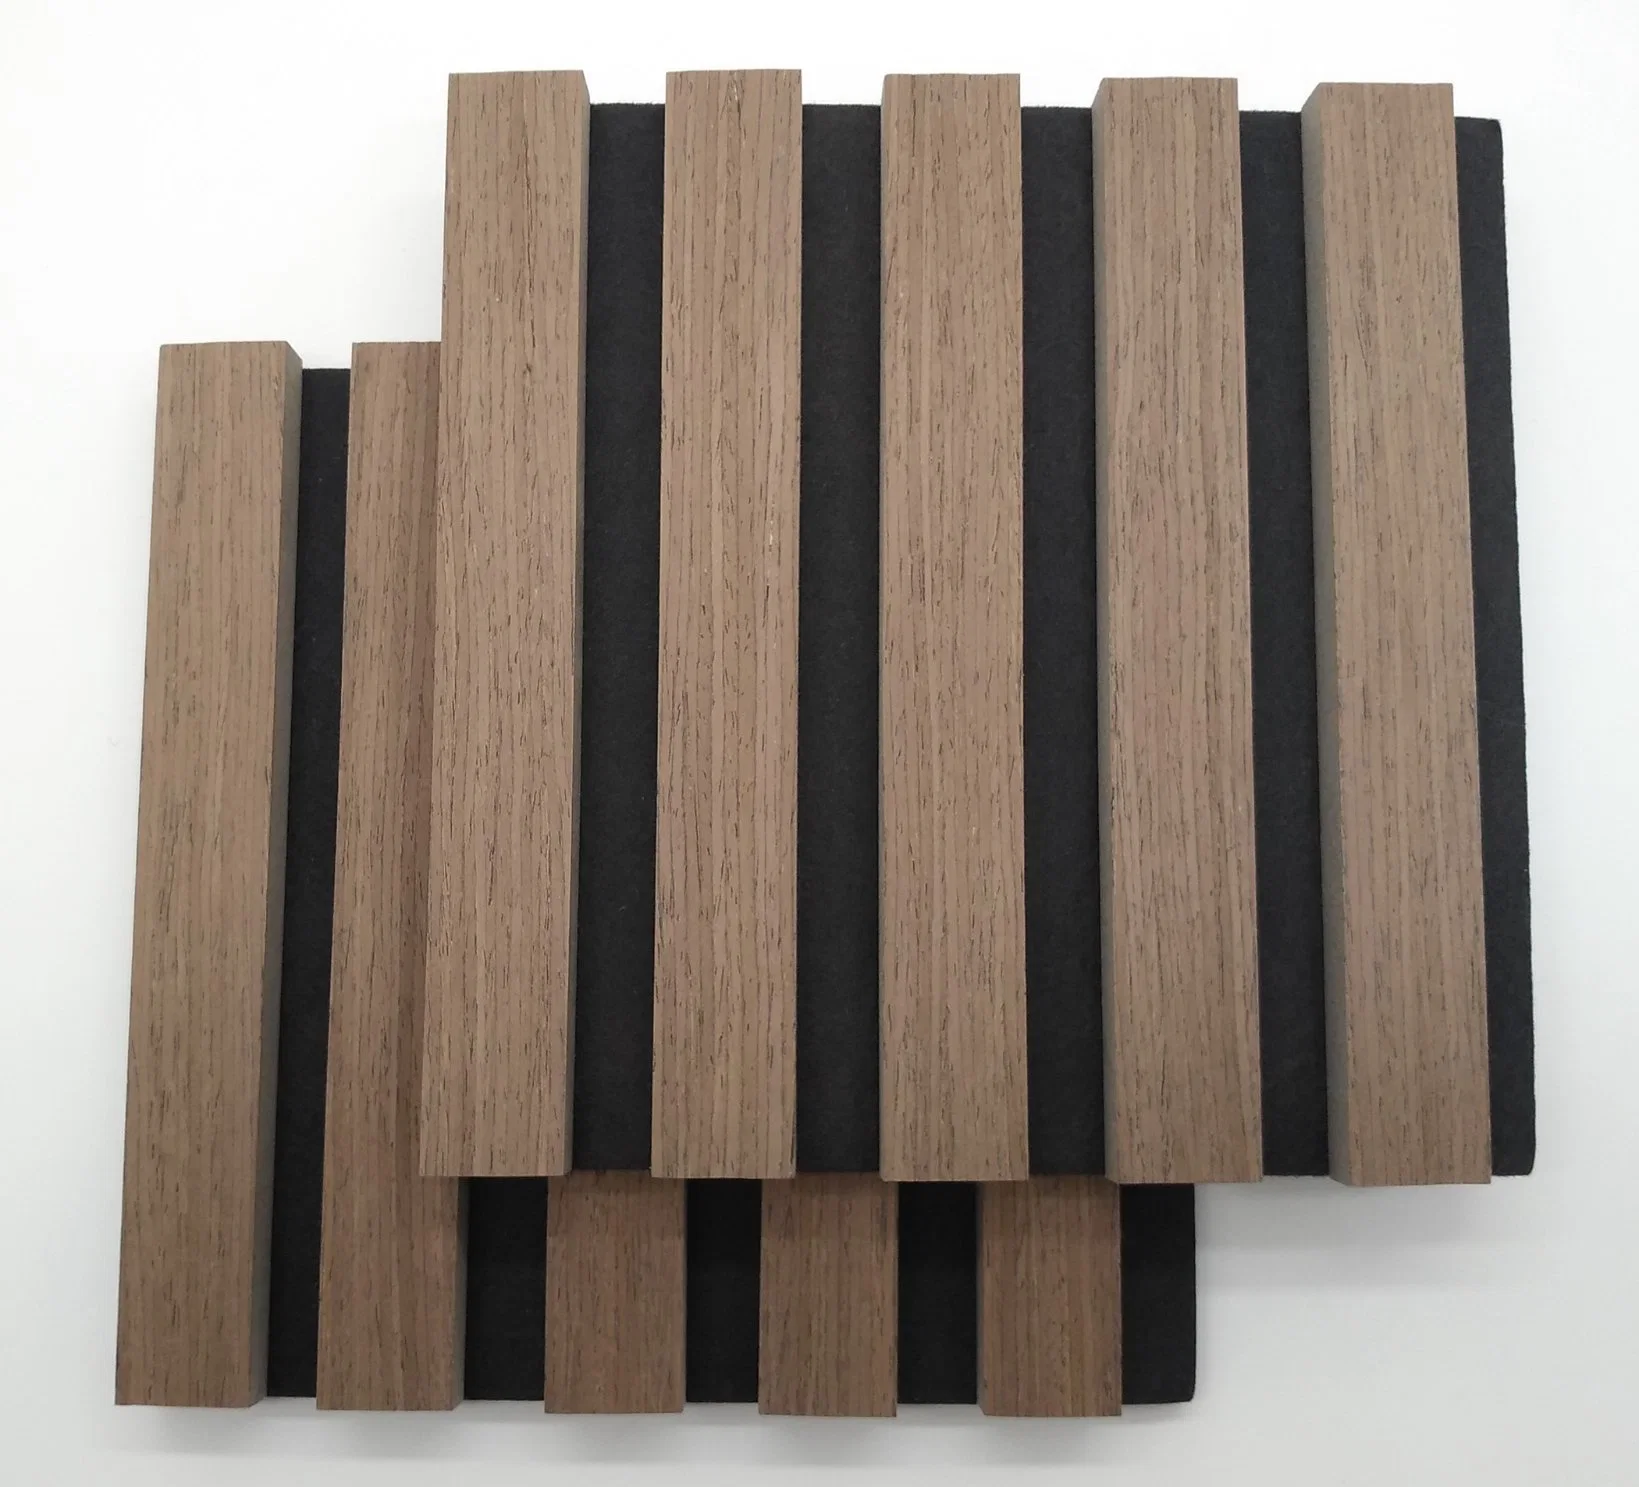 Wood Slat Acoustic Panel Wall Ceiling Soundproofing Interior Decorated Building Material